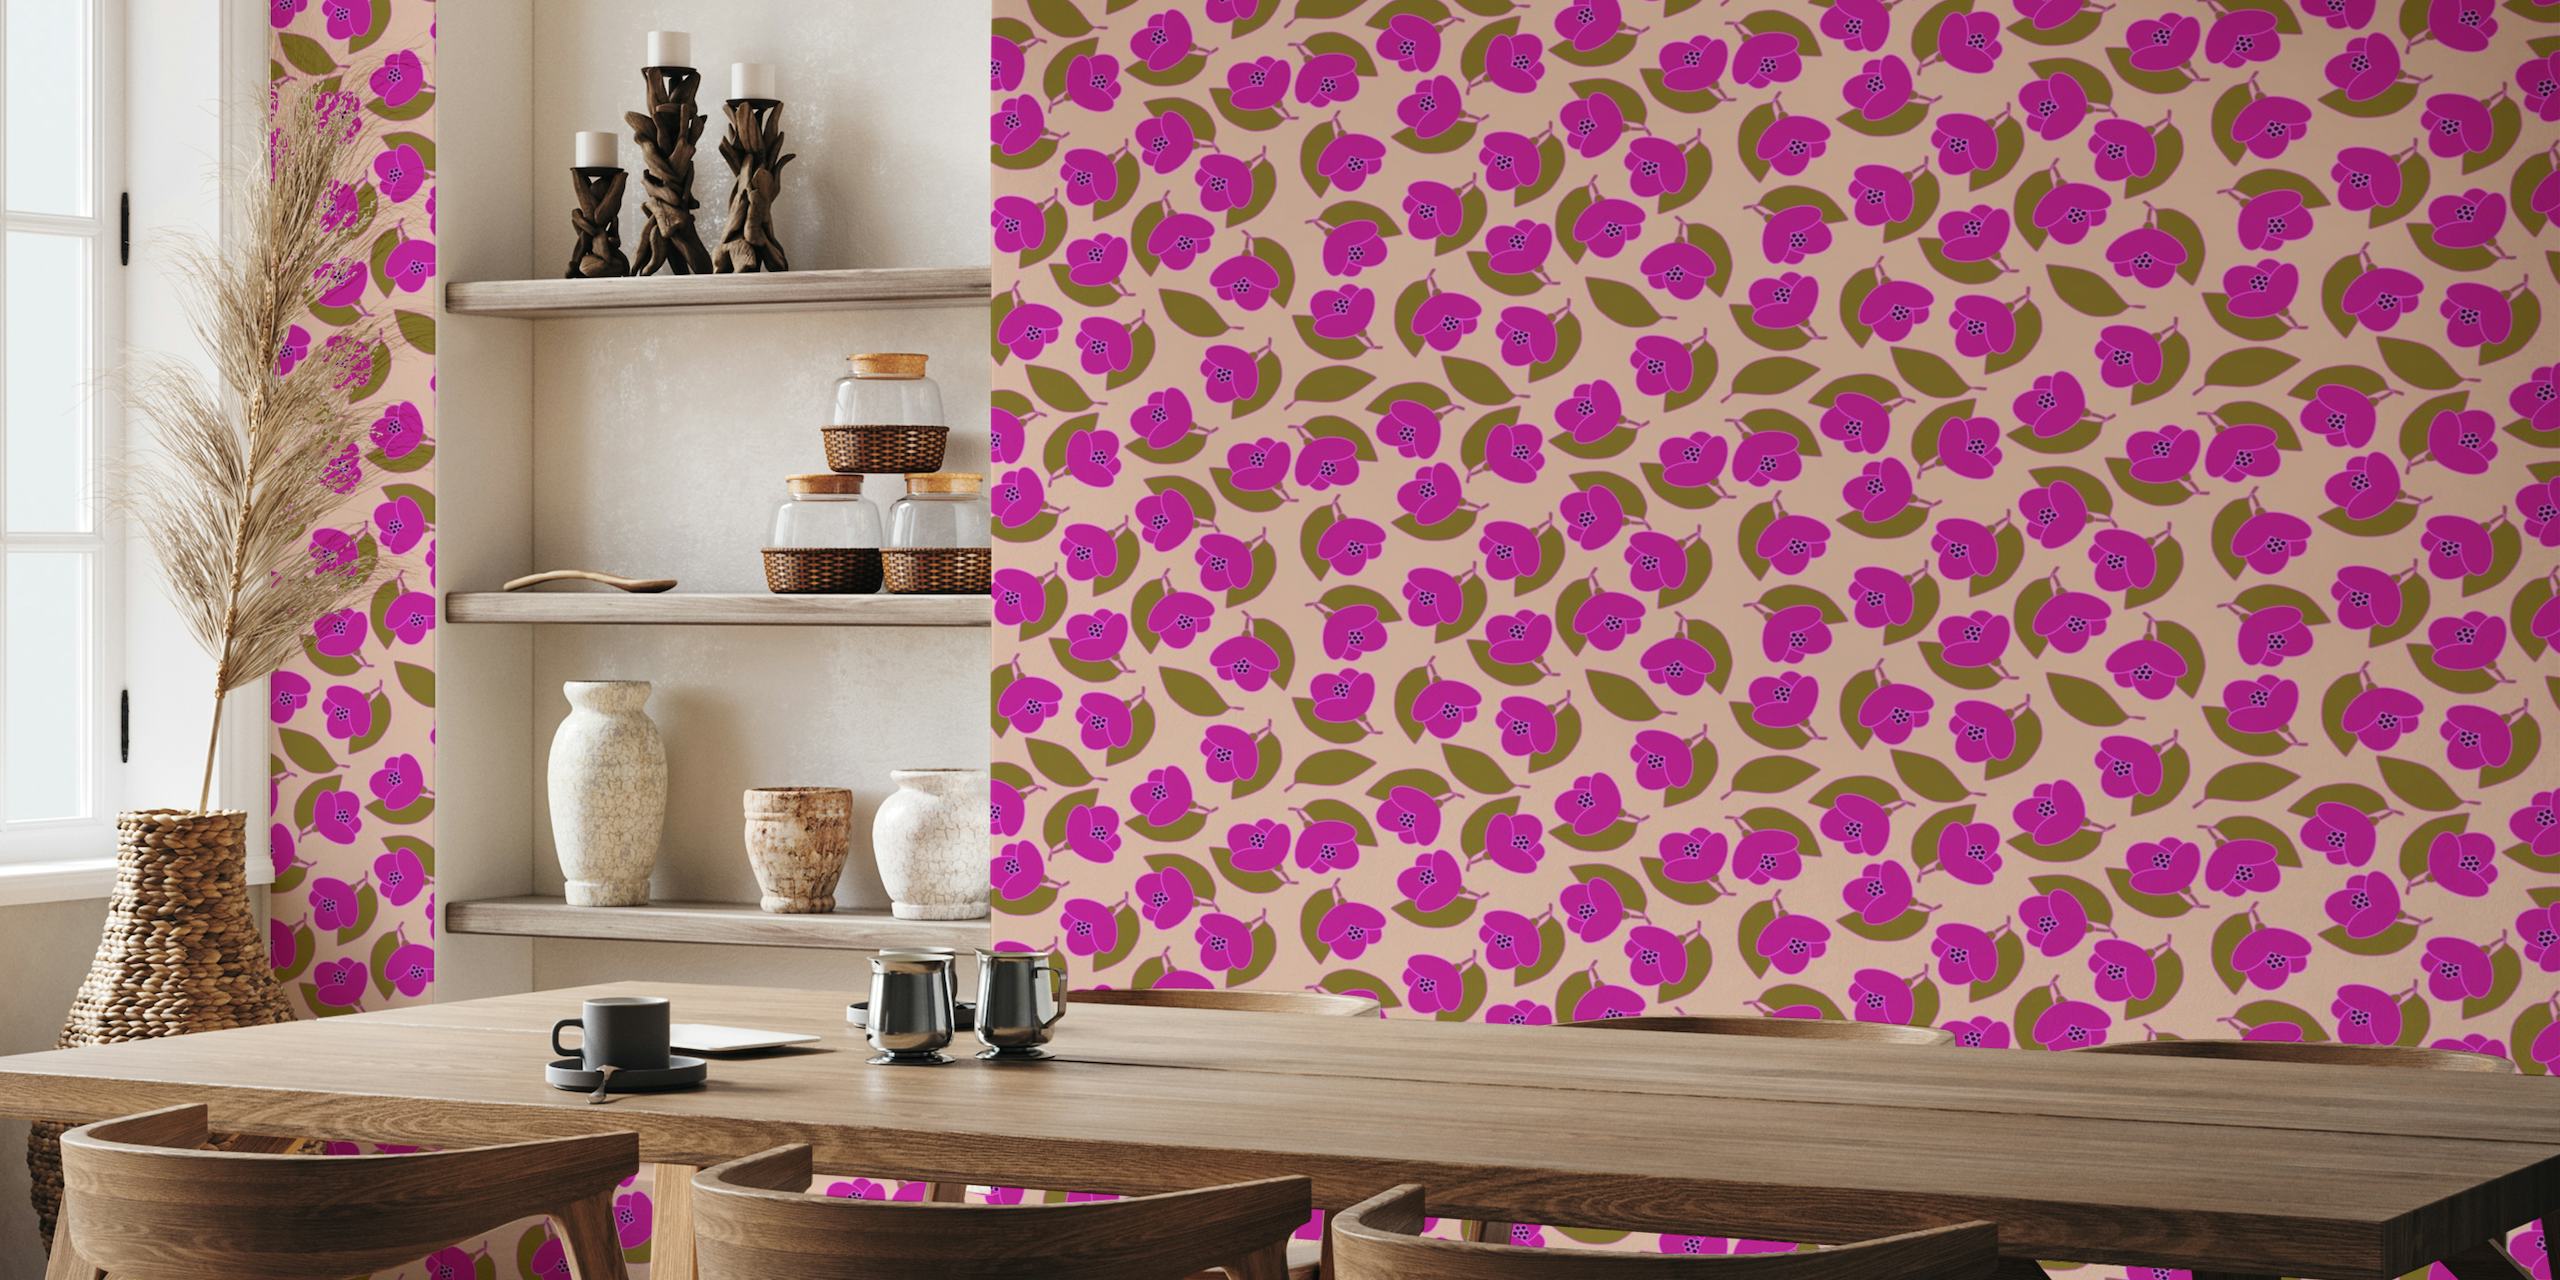 Jasmine flower pattern wall mural with leaves on pastel pink background